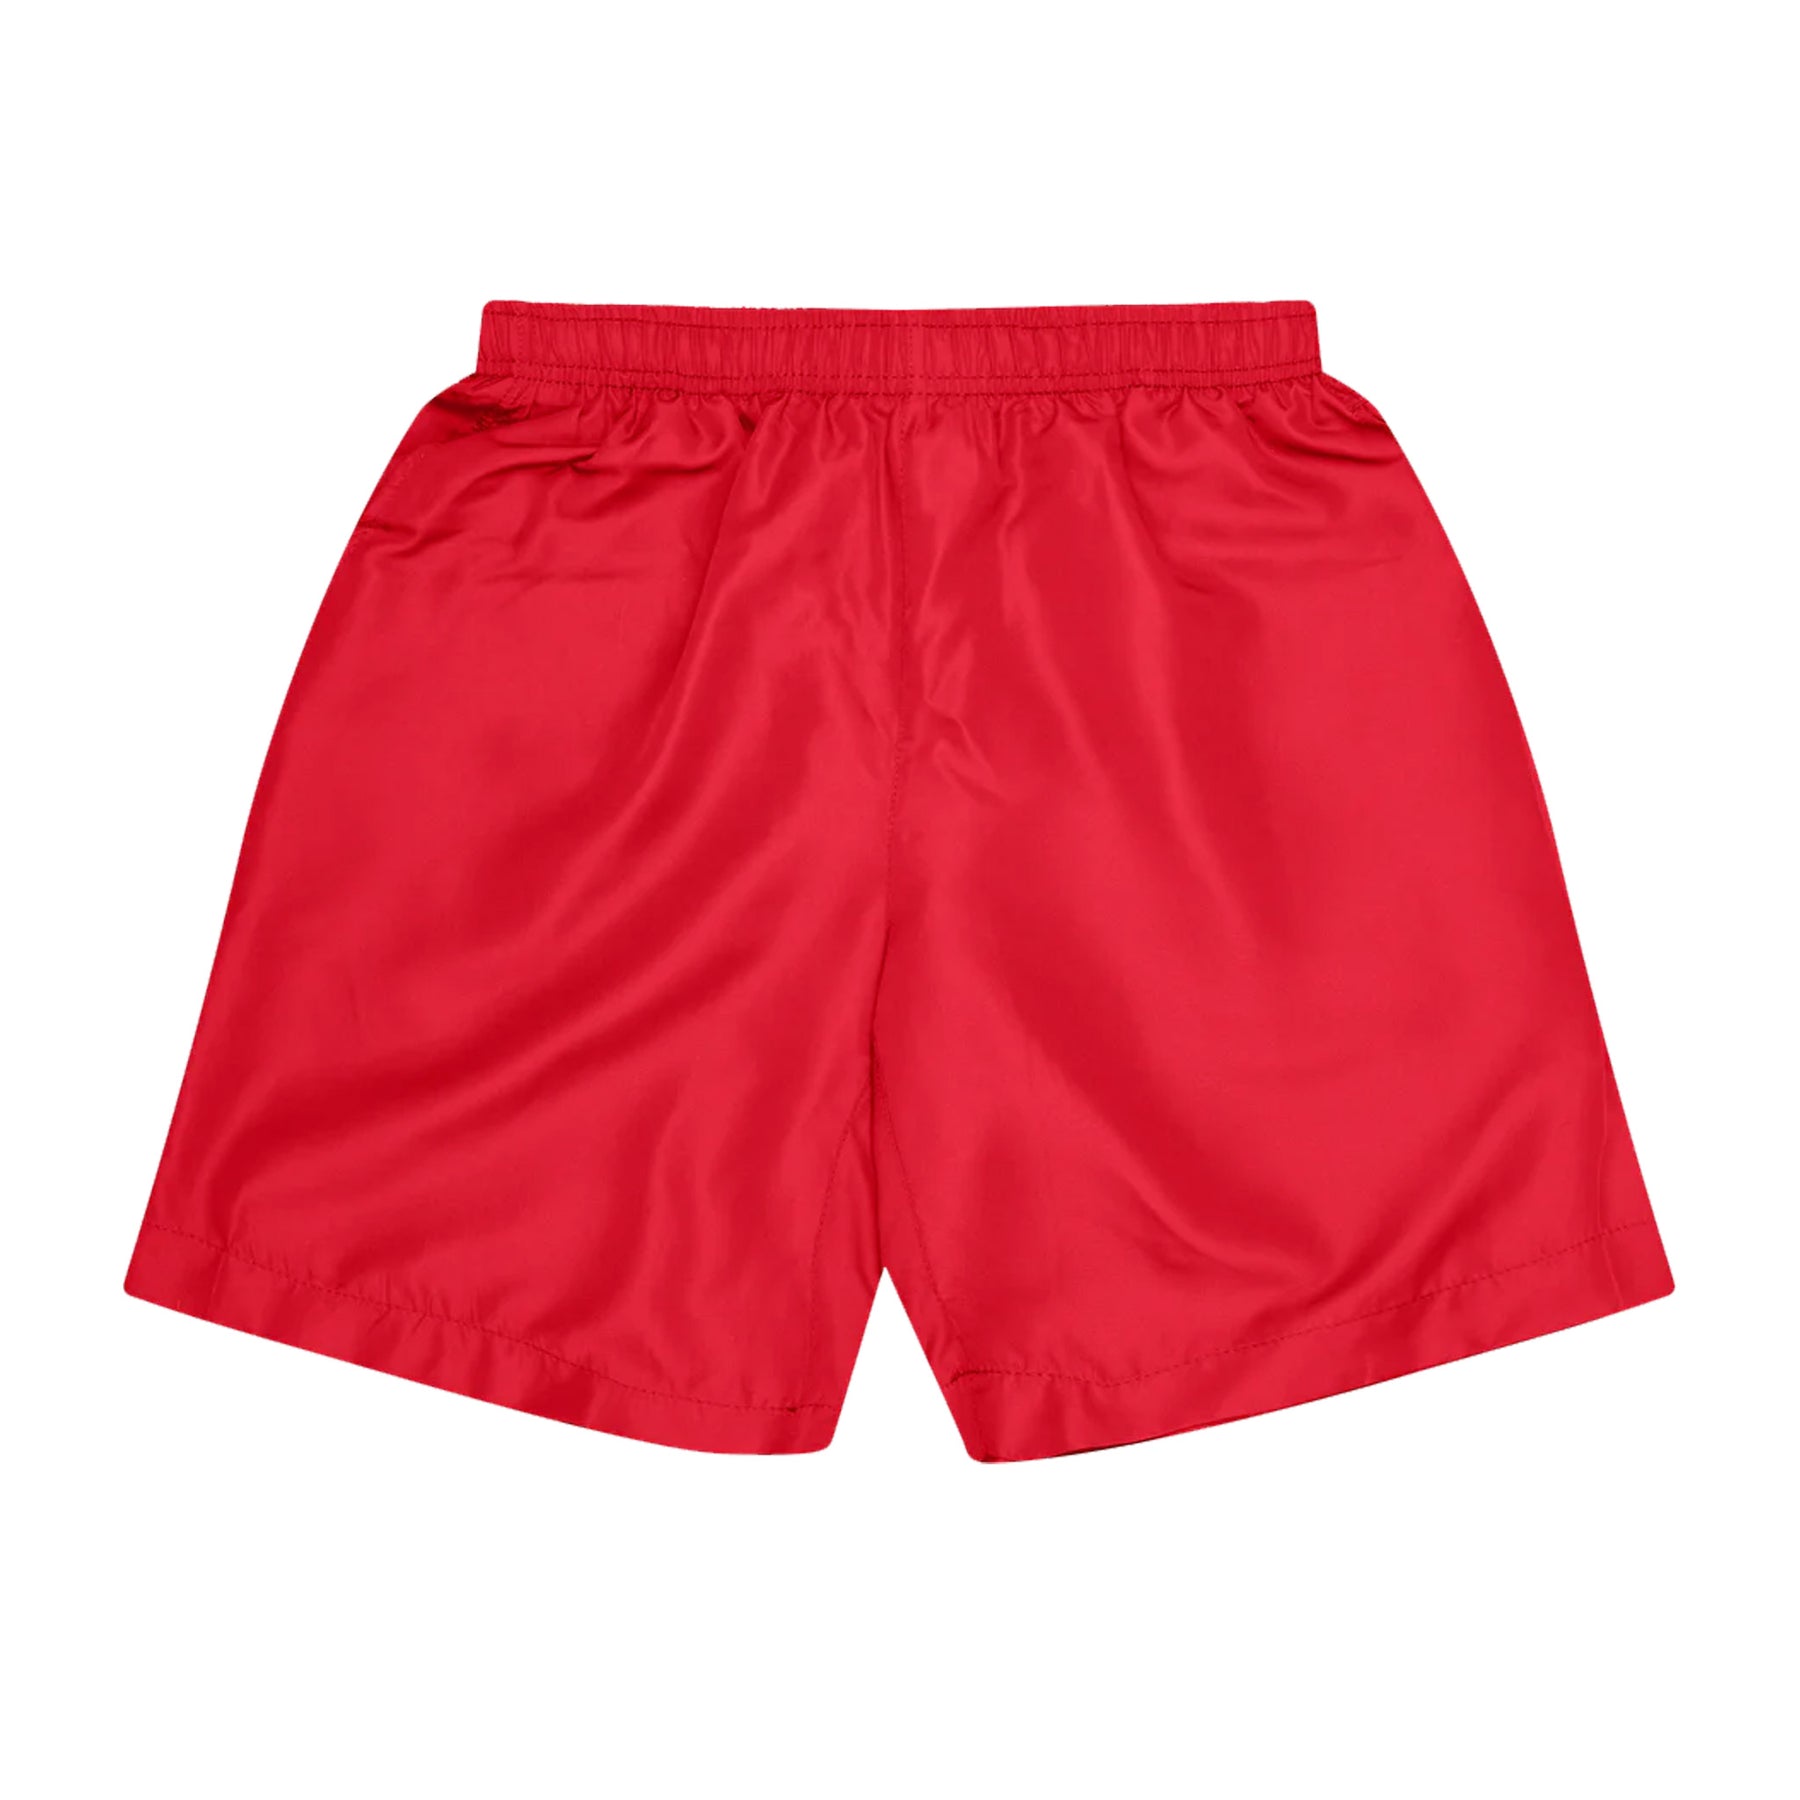 aussie pacific pongee short kids shorts in red